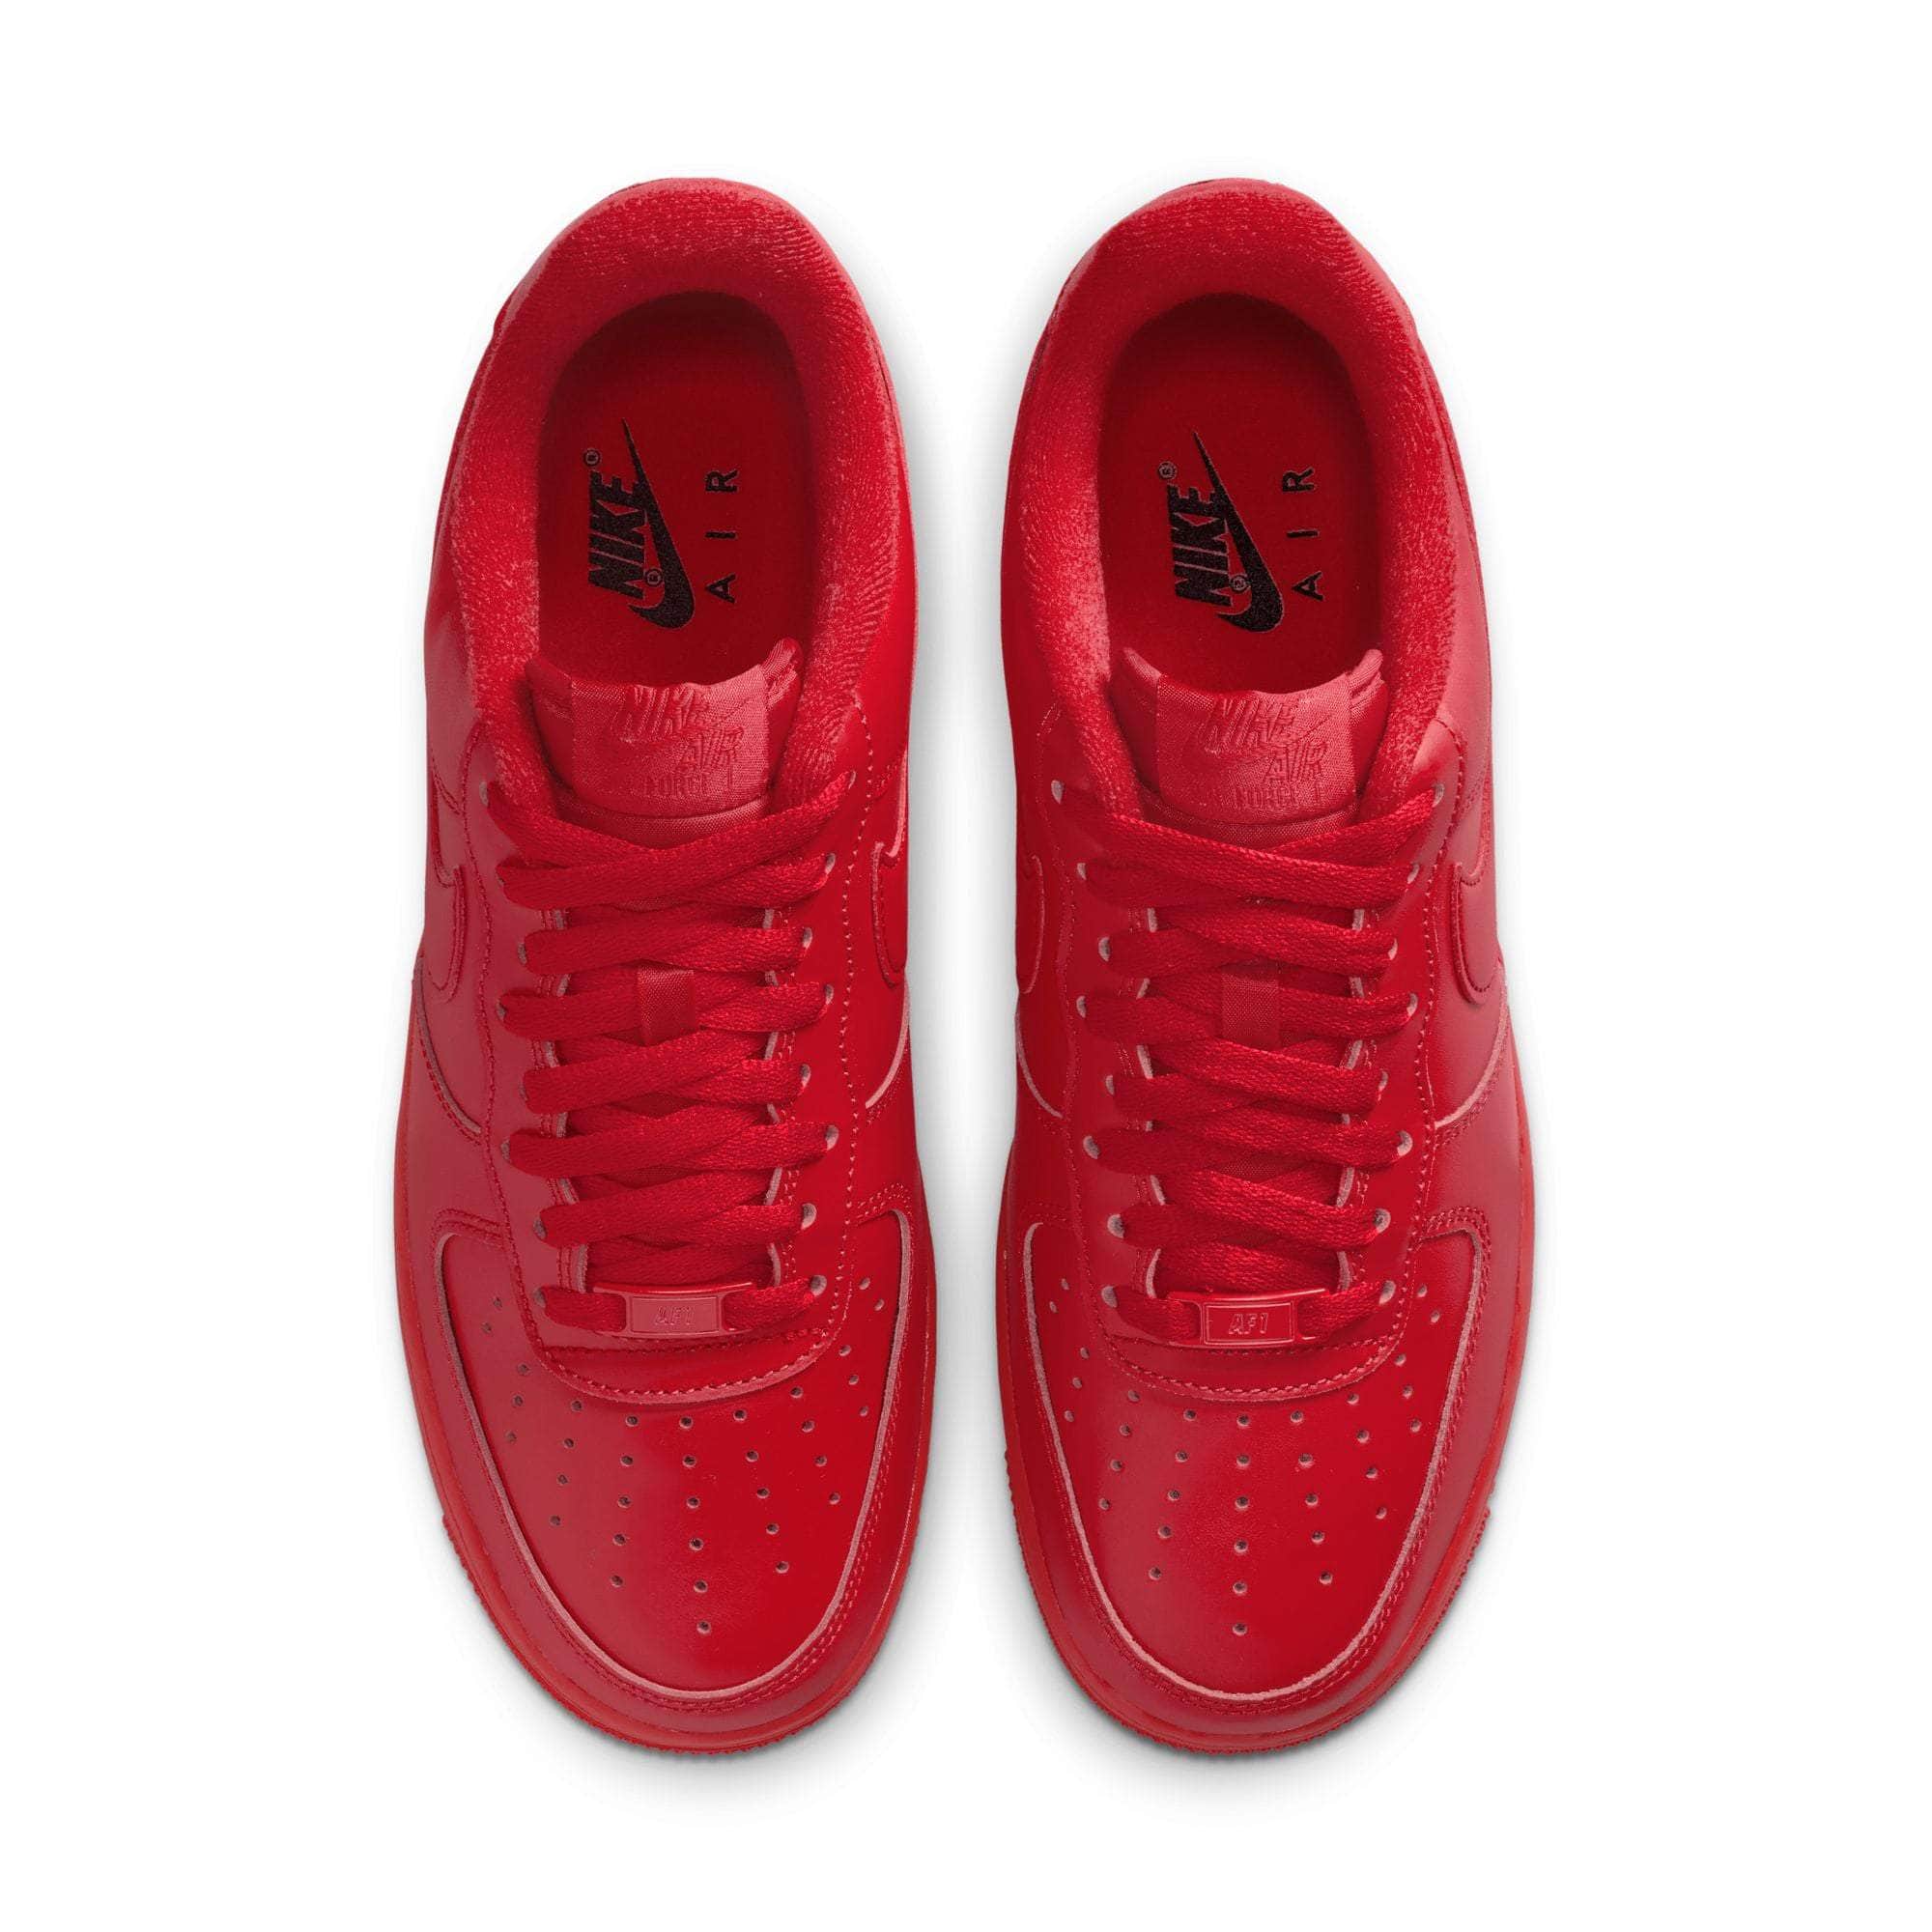 Nike Air Force 1 '07 LV8 Shoes - Men's - GBNY